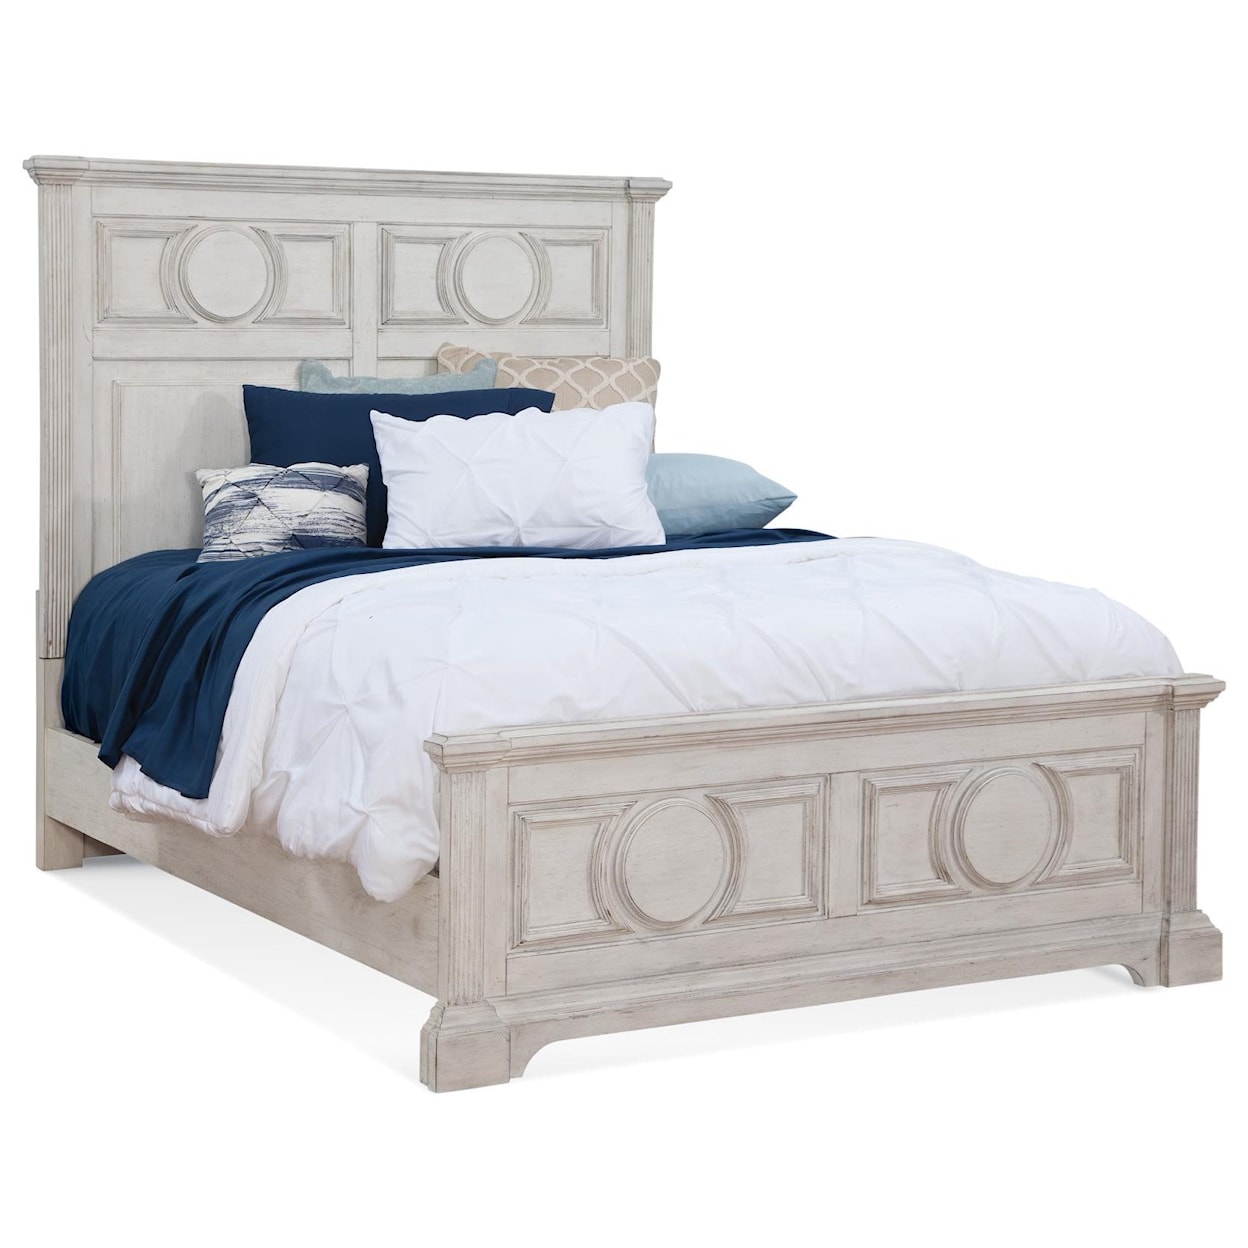 American Woodcrafters Brighten King Panel Bed